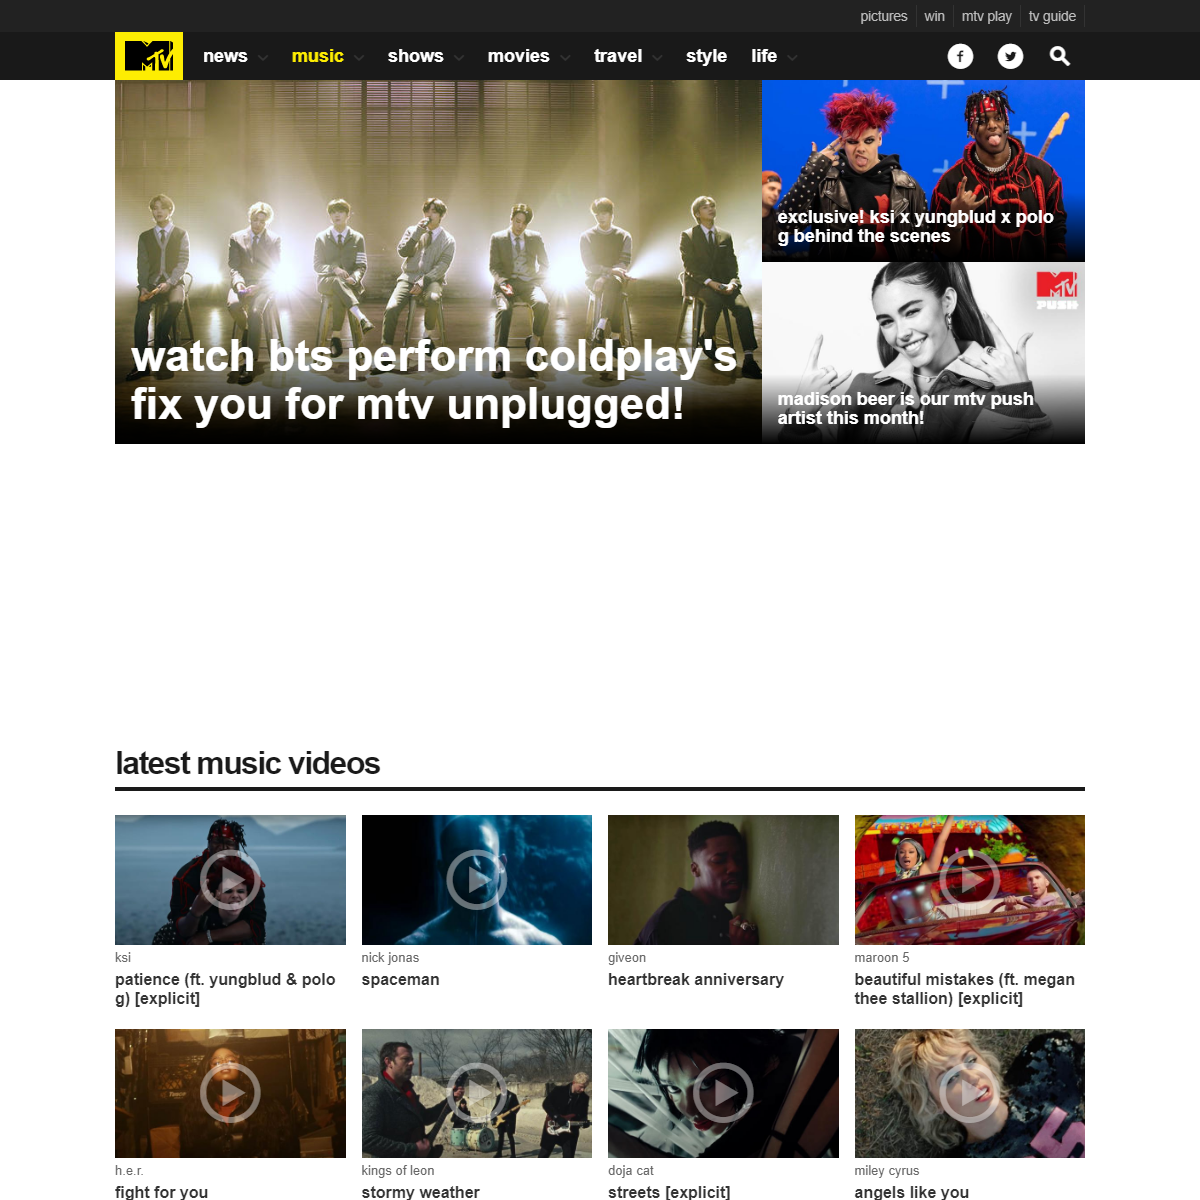 A complete backup of http://www.mtv.co.uk/music